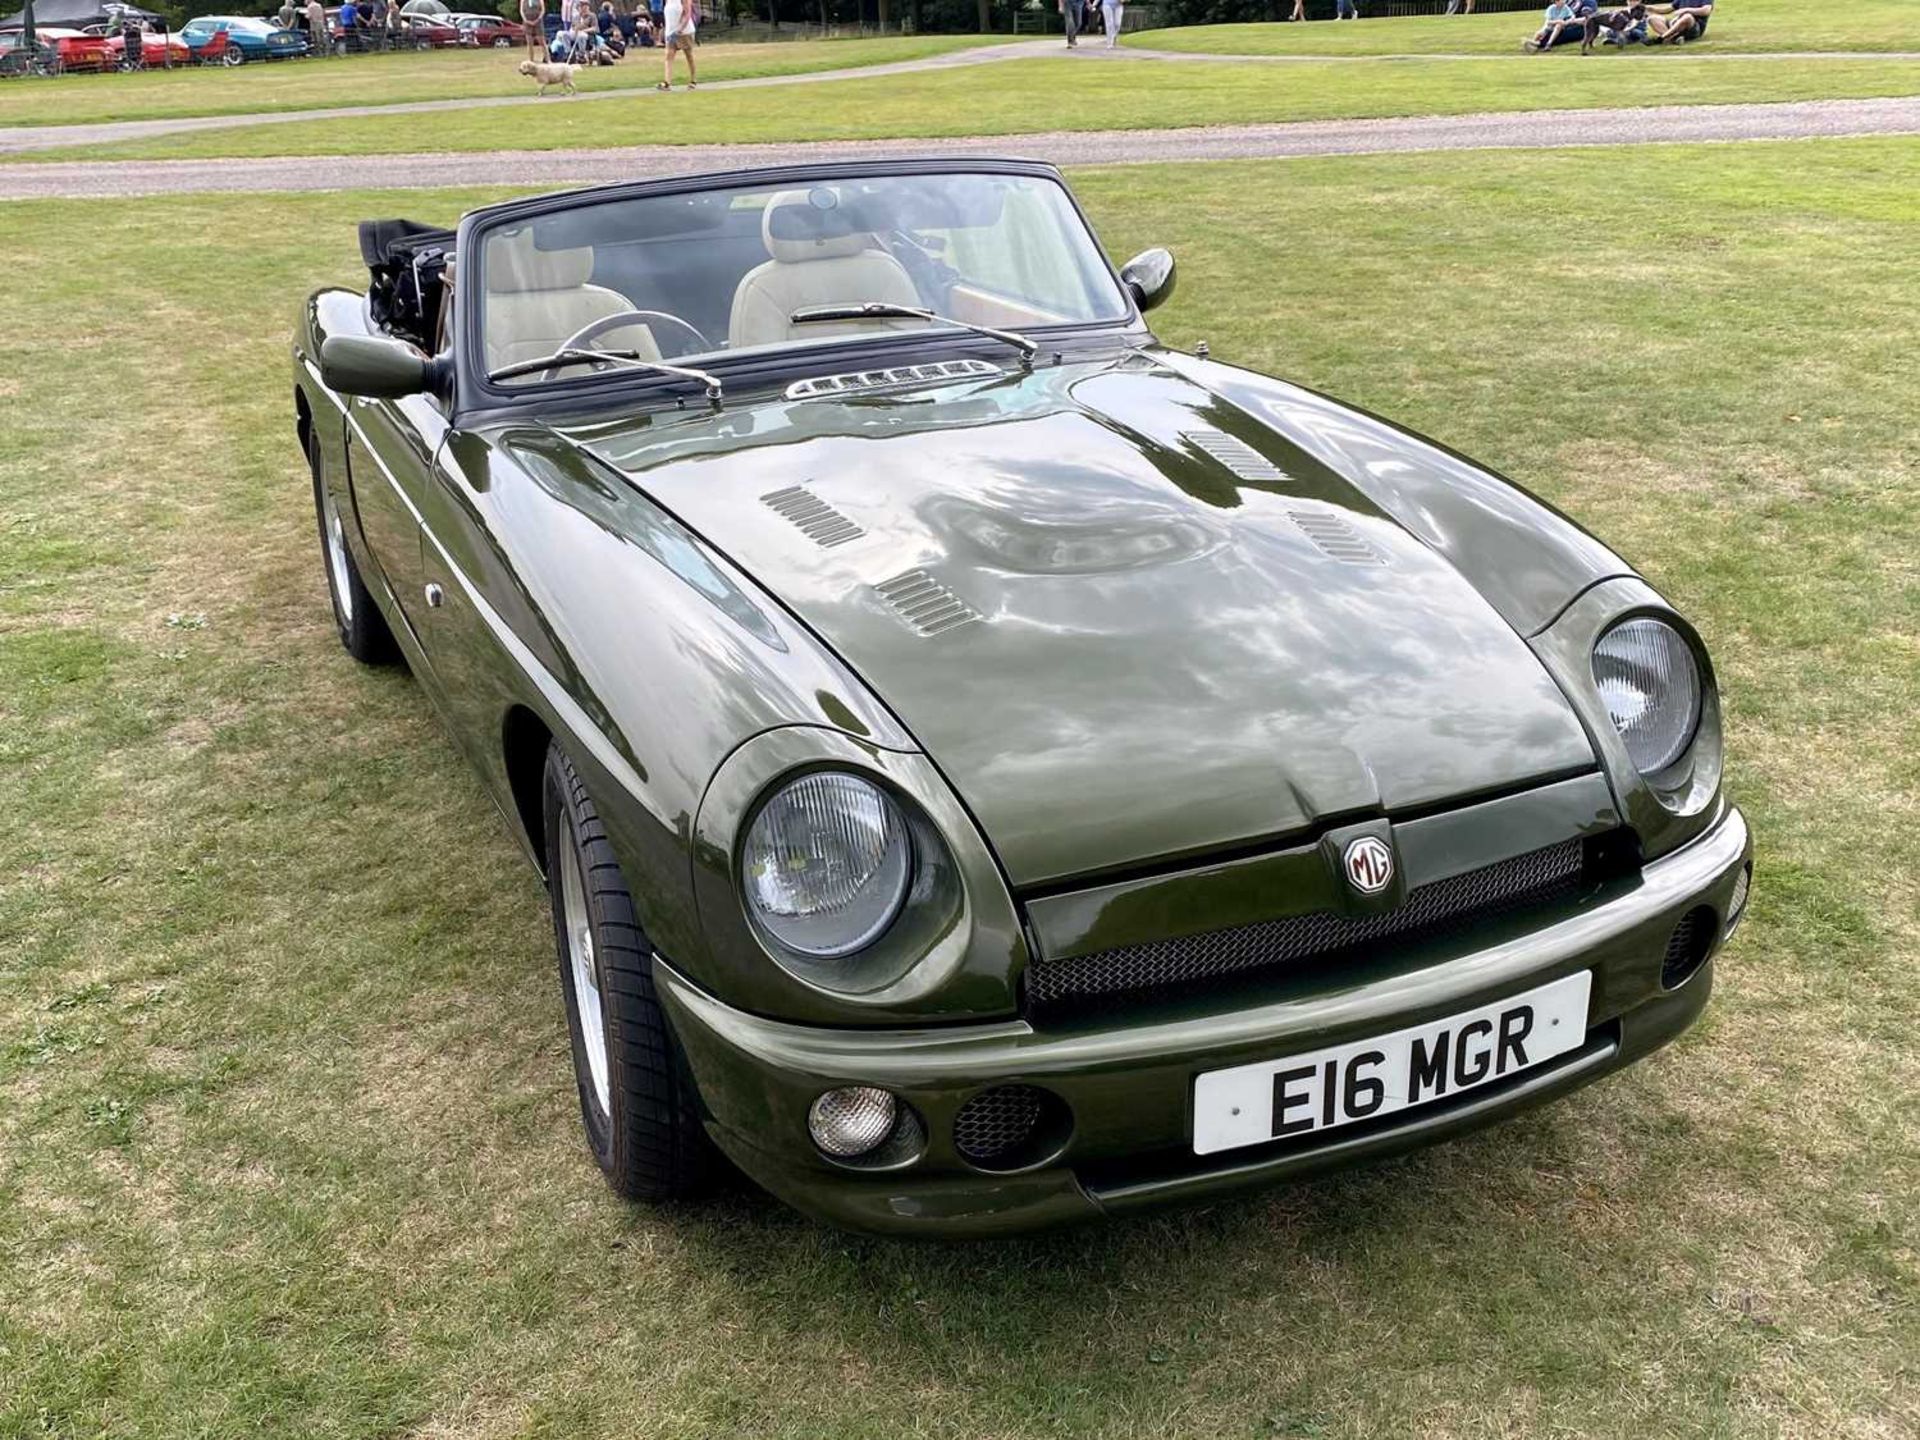 1995 MG RV8 A rare and sought-after car fitted with power steering - Image 6 of 45